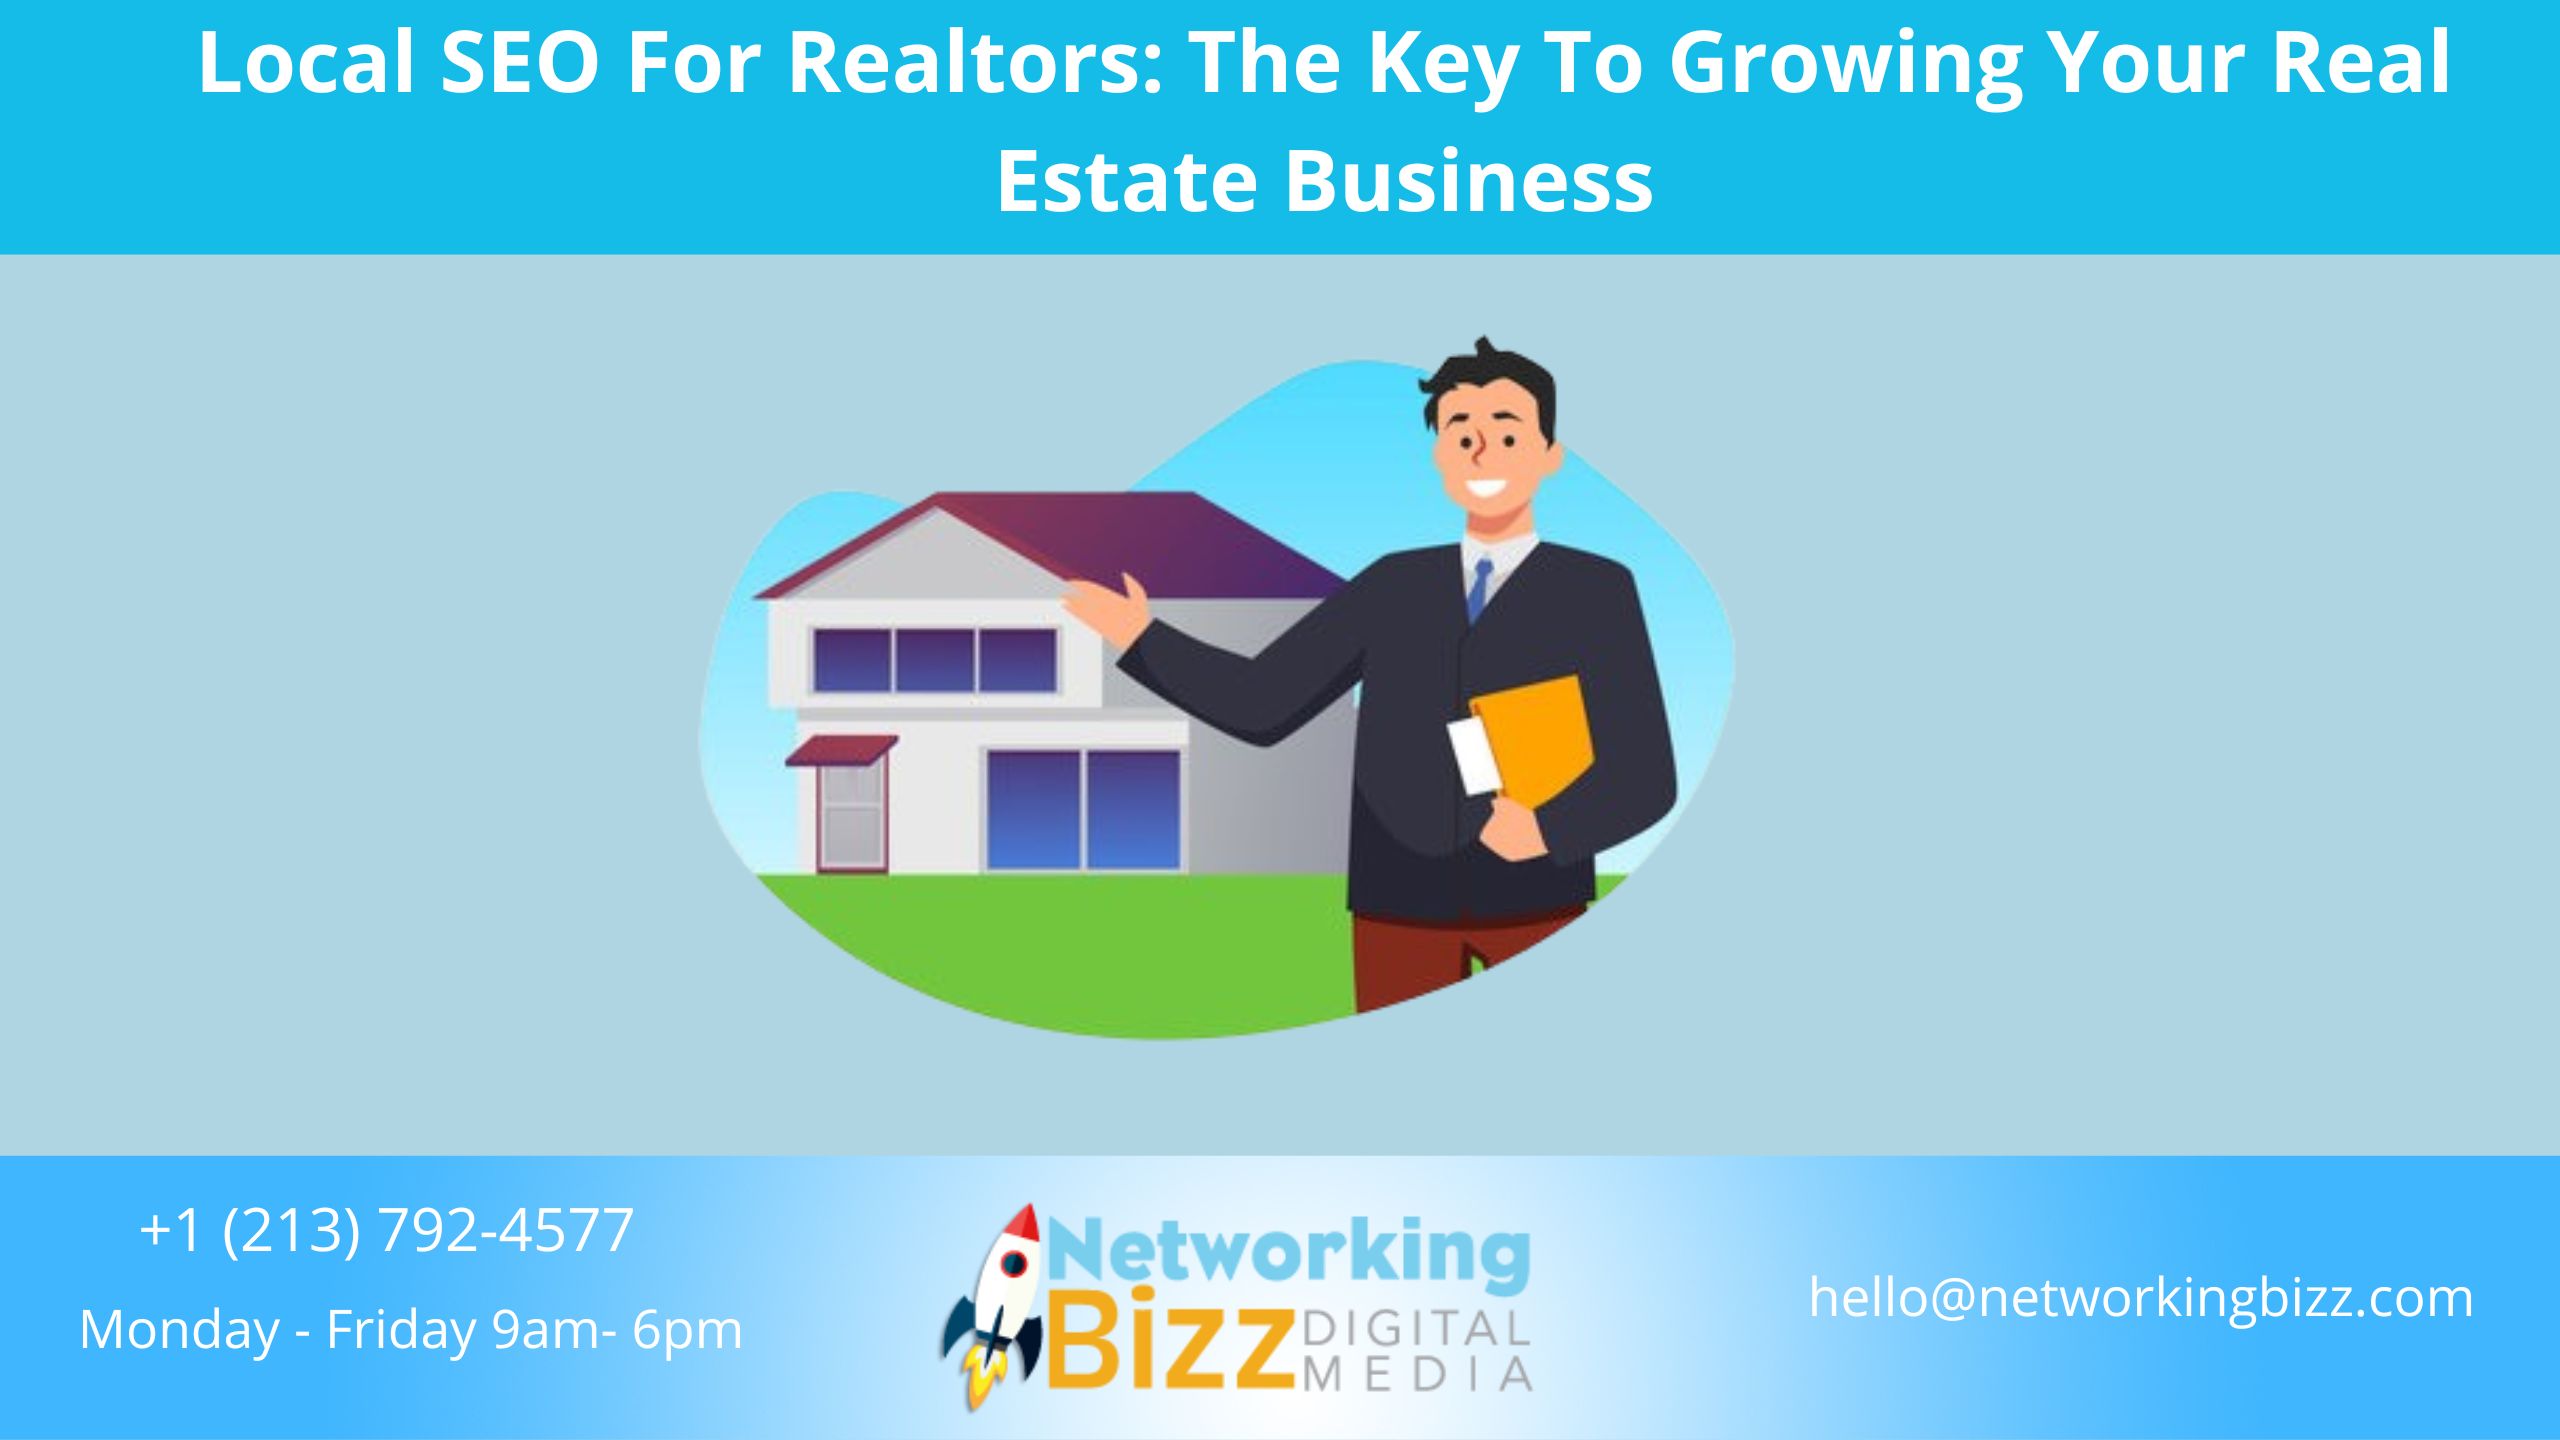 Local SEO For Realtors: The Key To Growing Your Real Estate Business